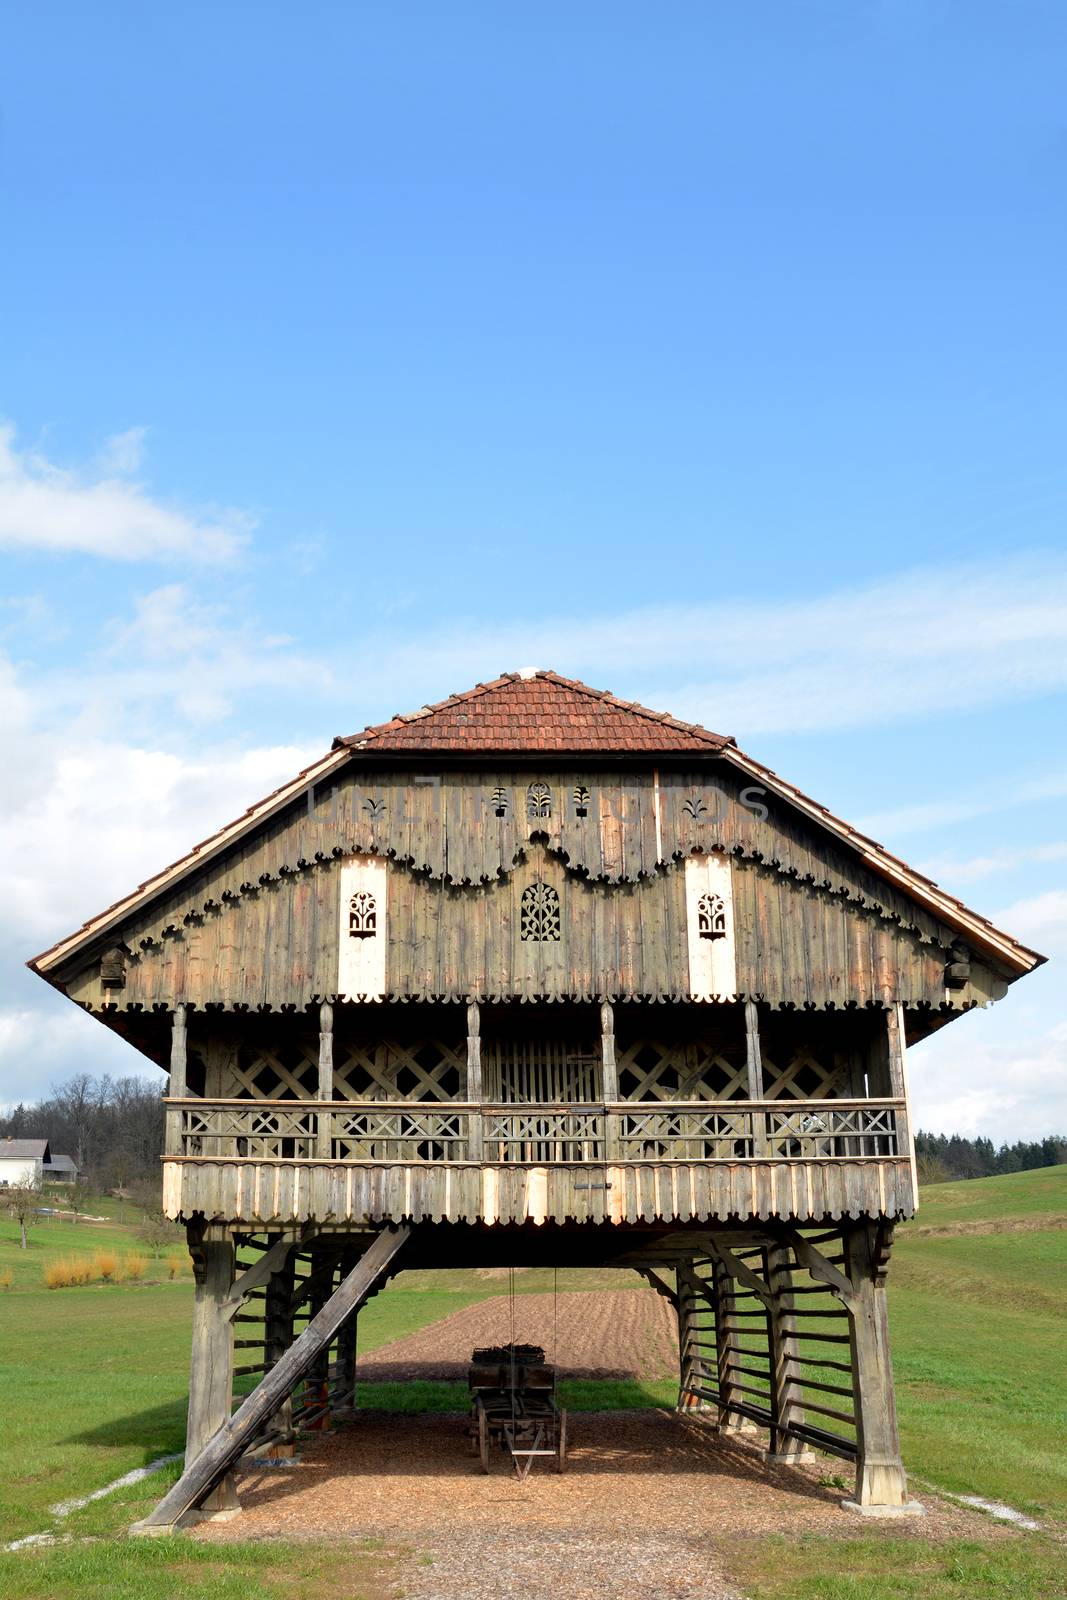 Traditional Slovenian structure, used for storing farming tools, drying corn, and so on